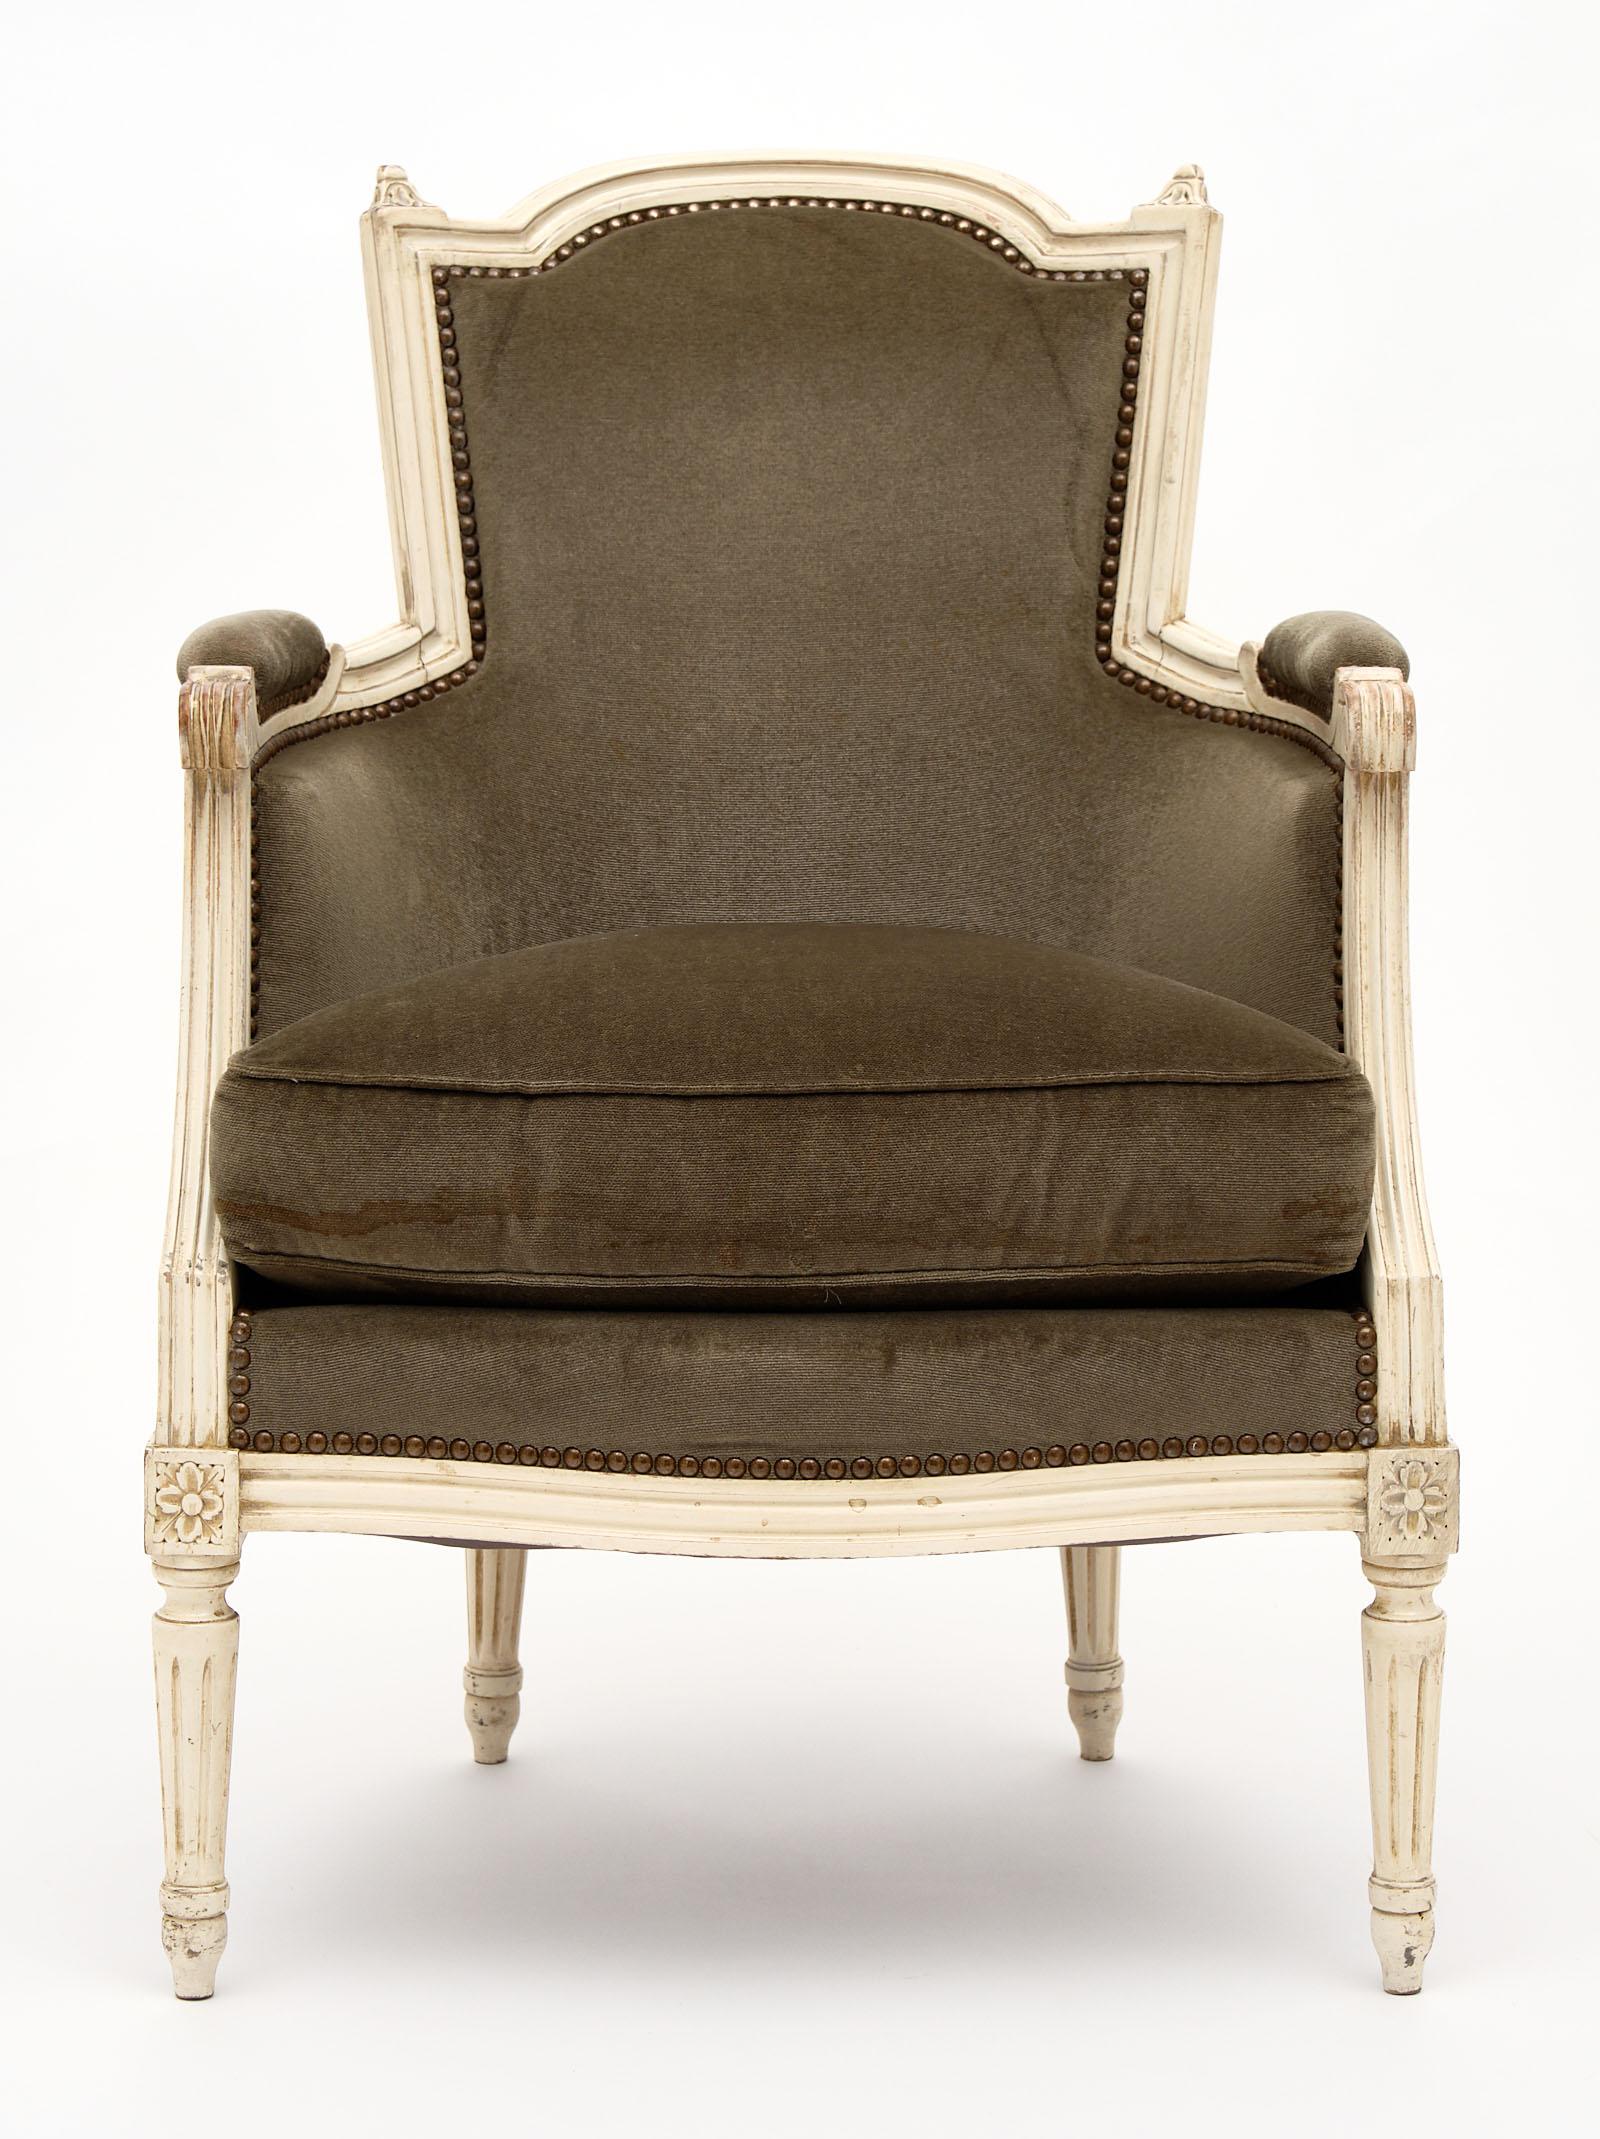 Early 20th Century Louis XVI Style French Antique Bergères